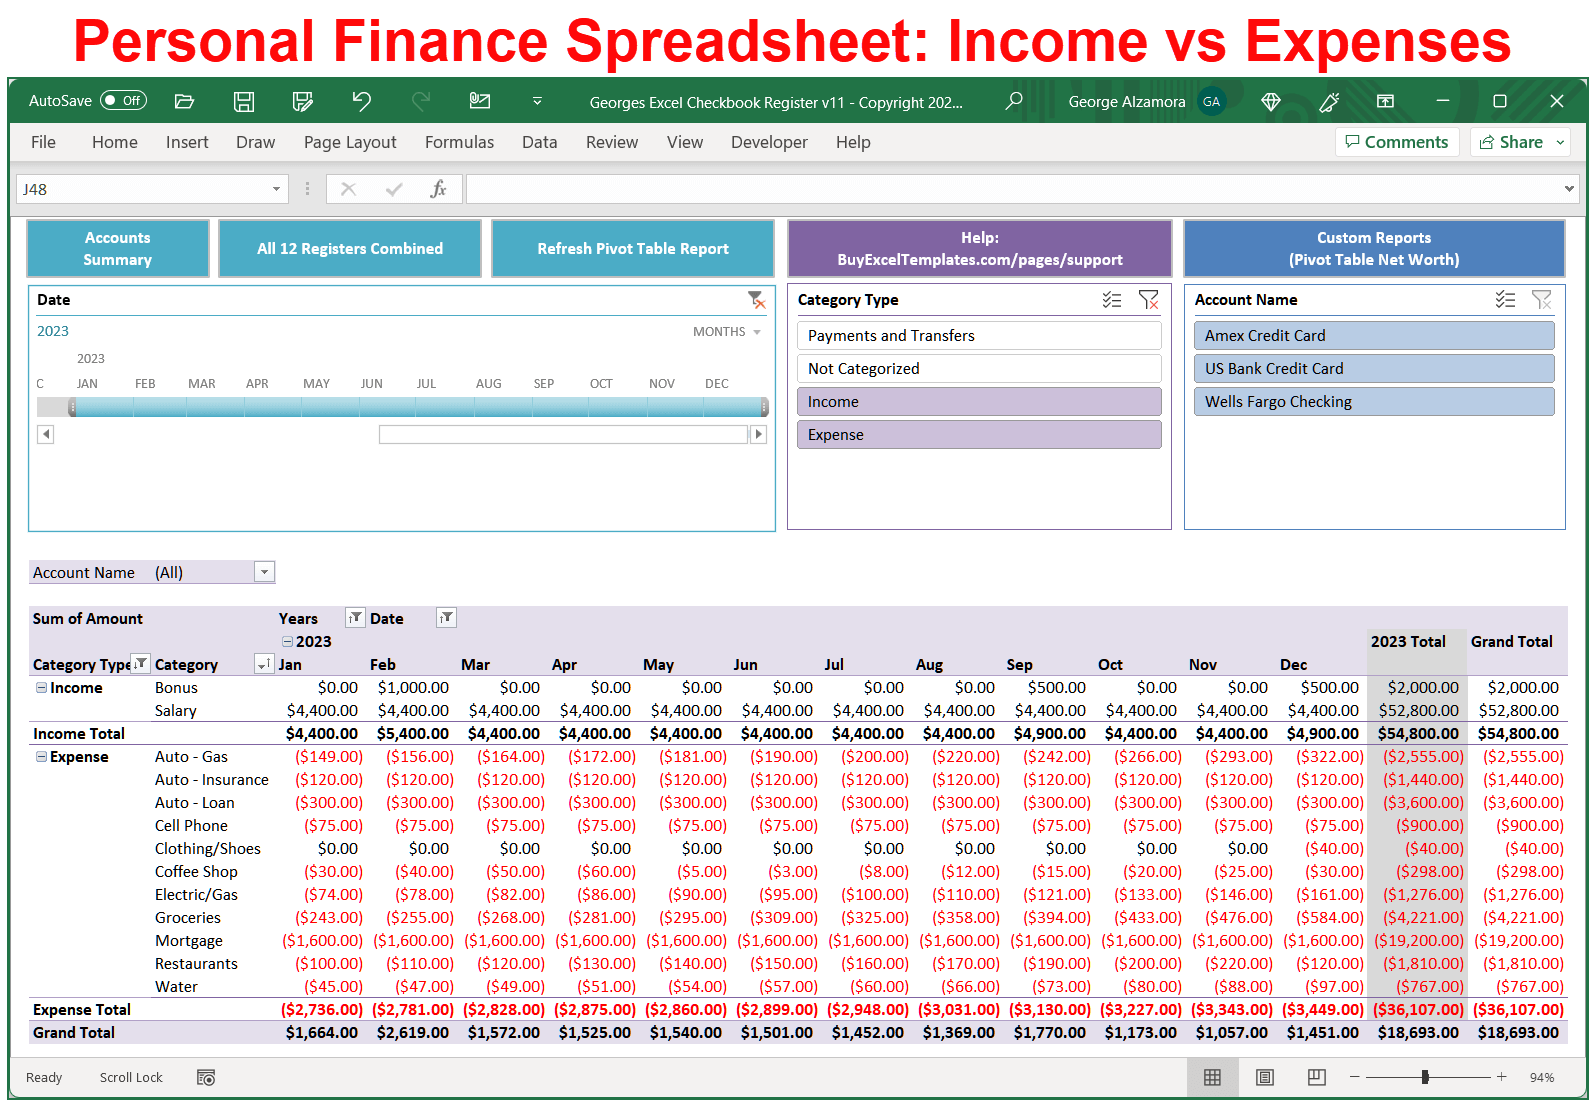 Personal Finance Spreadsheet Income Spending Reports